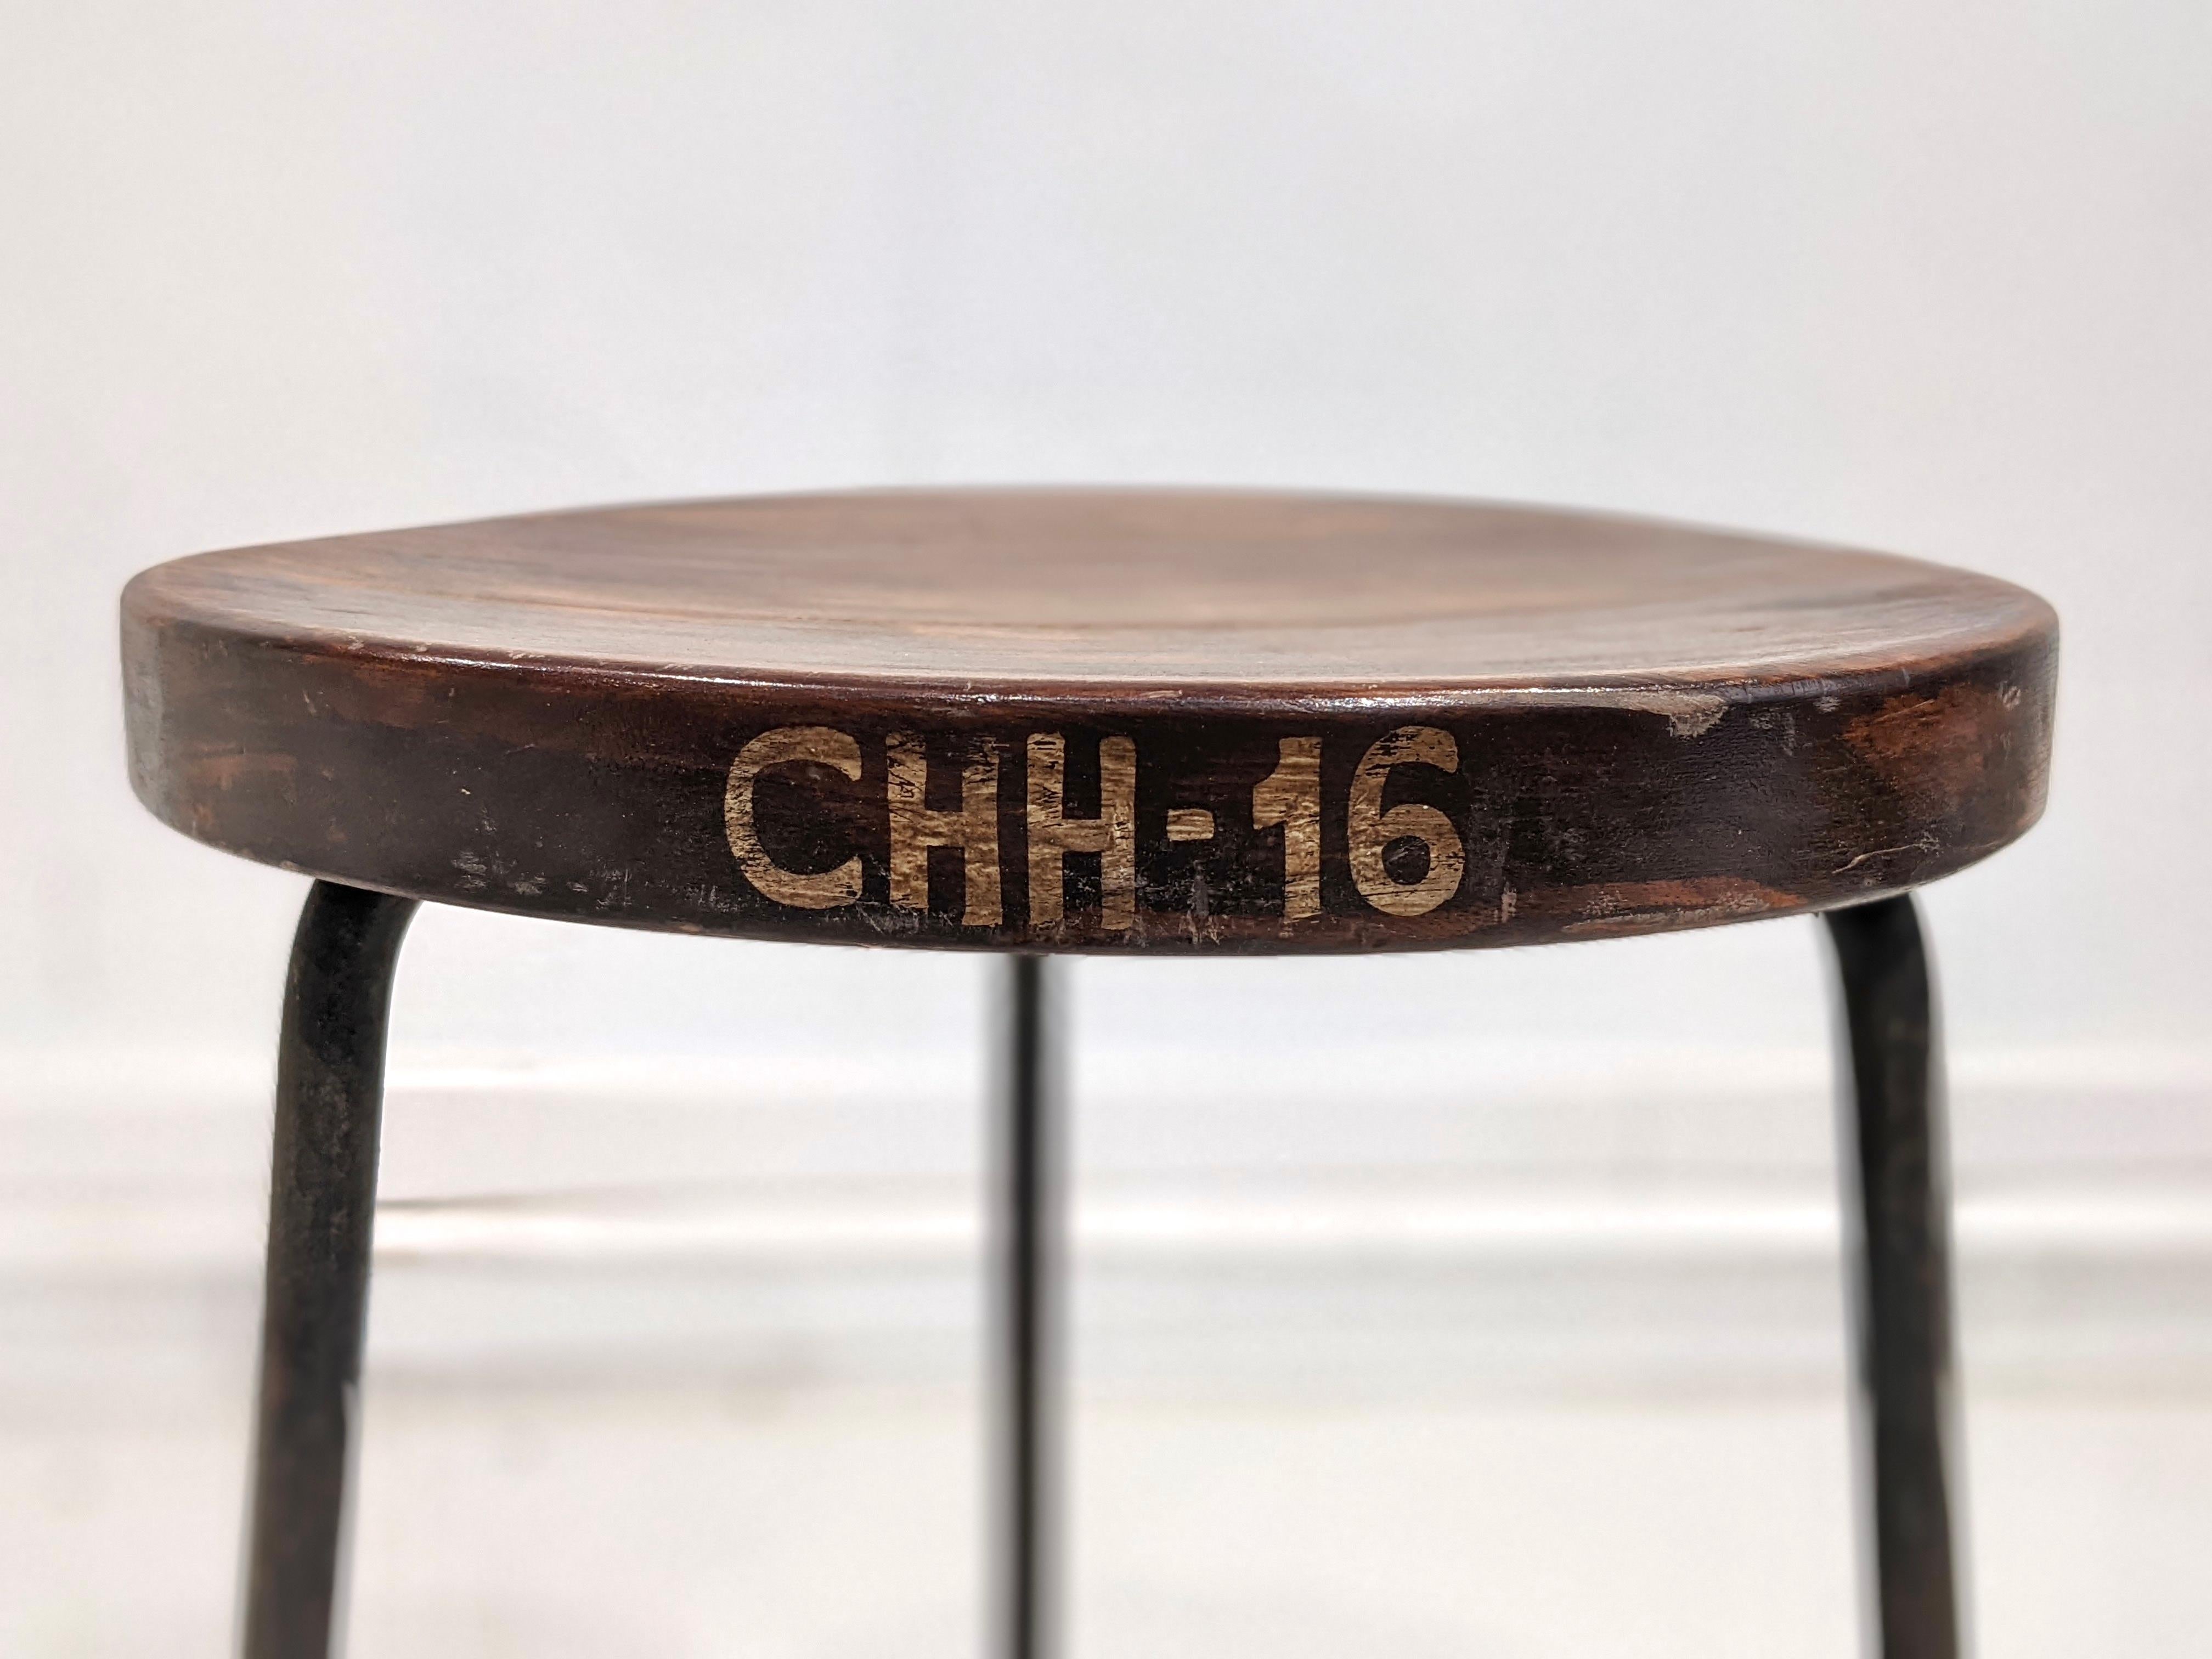 Pierre Jeanneret metal stool 
Circa 1960
Teak stool. Metal structure and round teak seat. 
Good condition. Some traces of wear due to age and use. 
Provenance : Chandigarh, India

Dimensions : H48 cm x D32.5 cm.